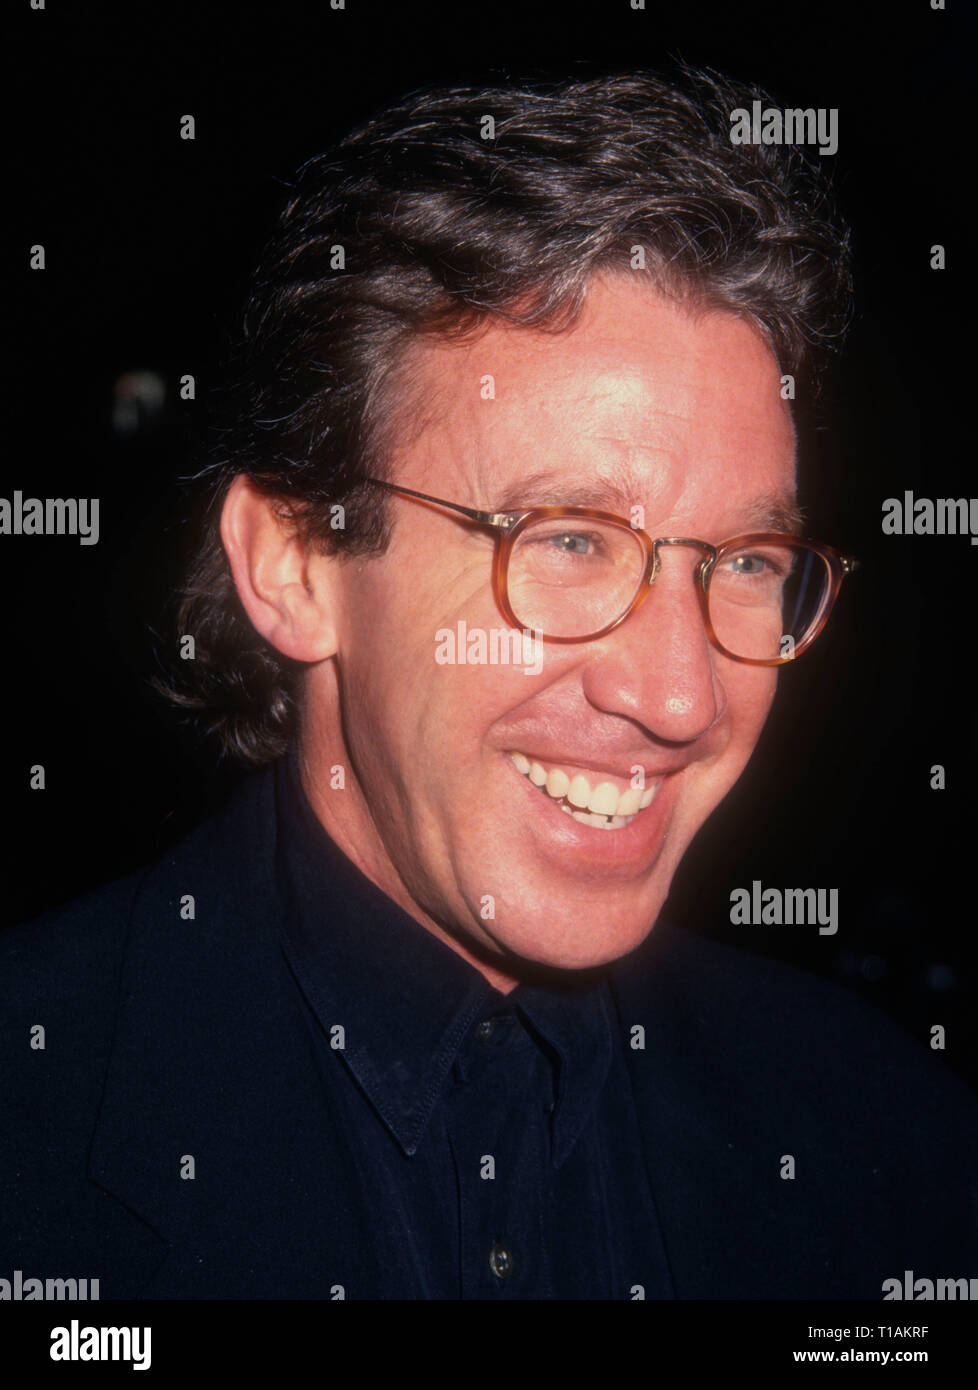 LOS ANGELES, CA - MARCH 6: Actor Tim Allen attends the Eighth Annual American Comedy Awards on March 6, 1994 at the Shrine Auditorium in Los Angeles, California. Photo by Barry King/Alamy Stock Photo Stock Photo